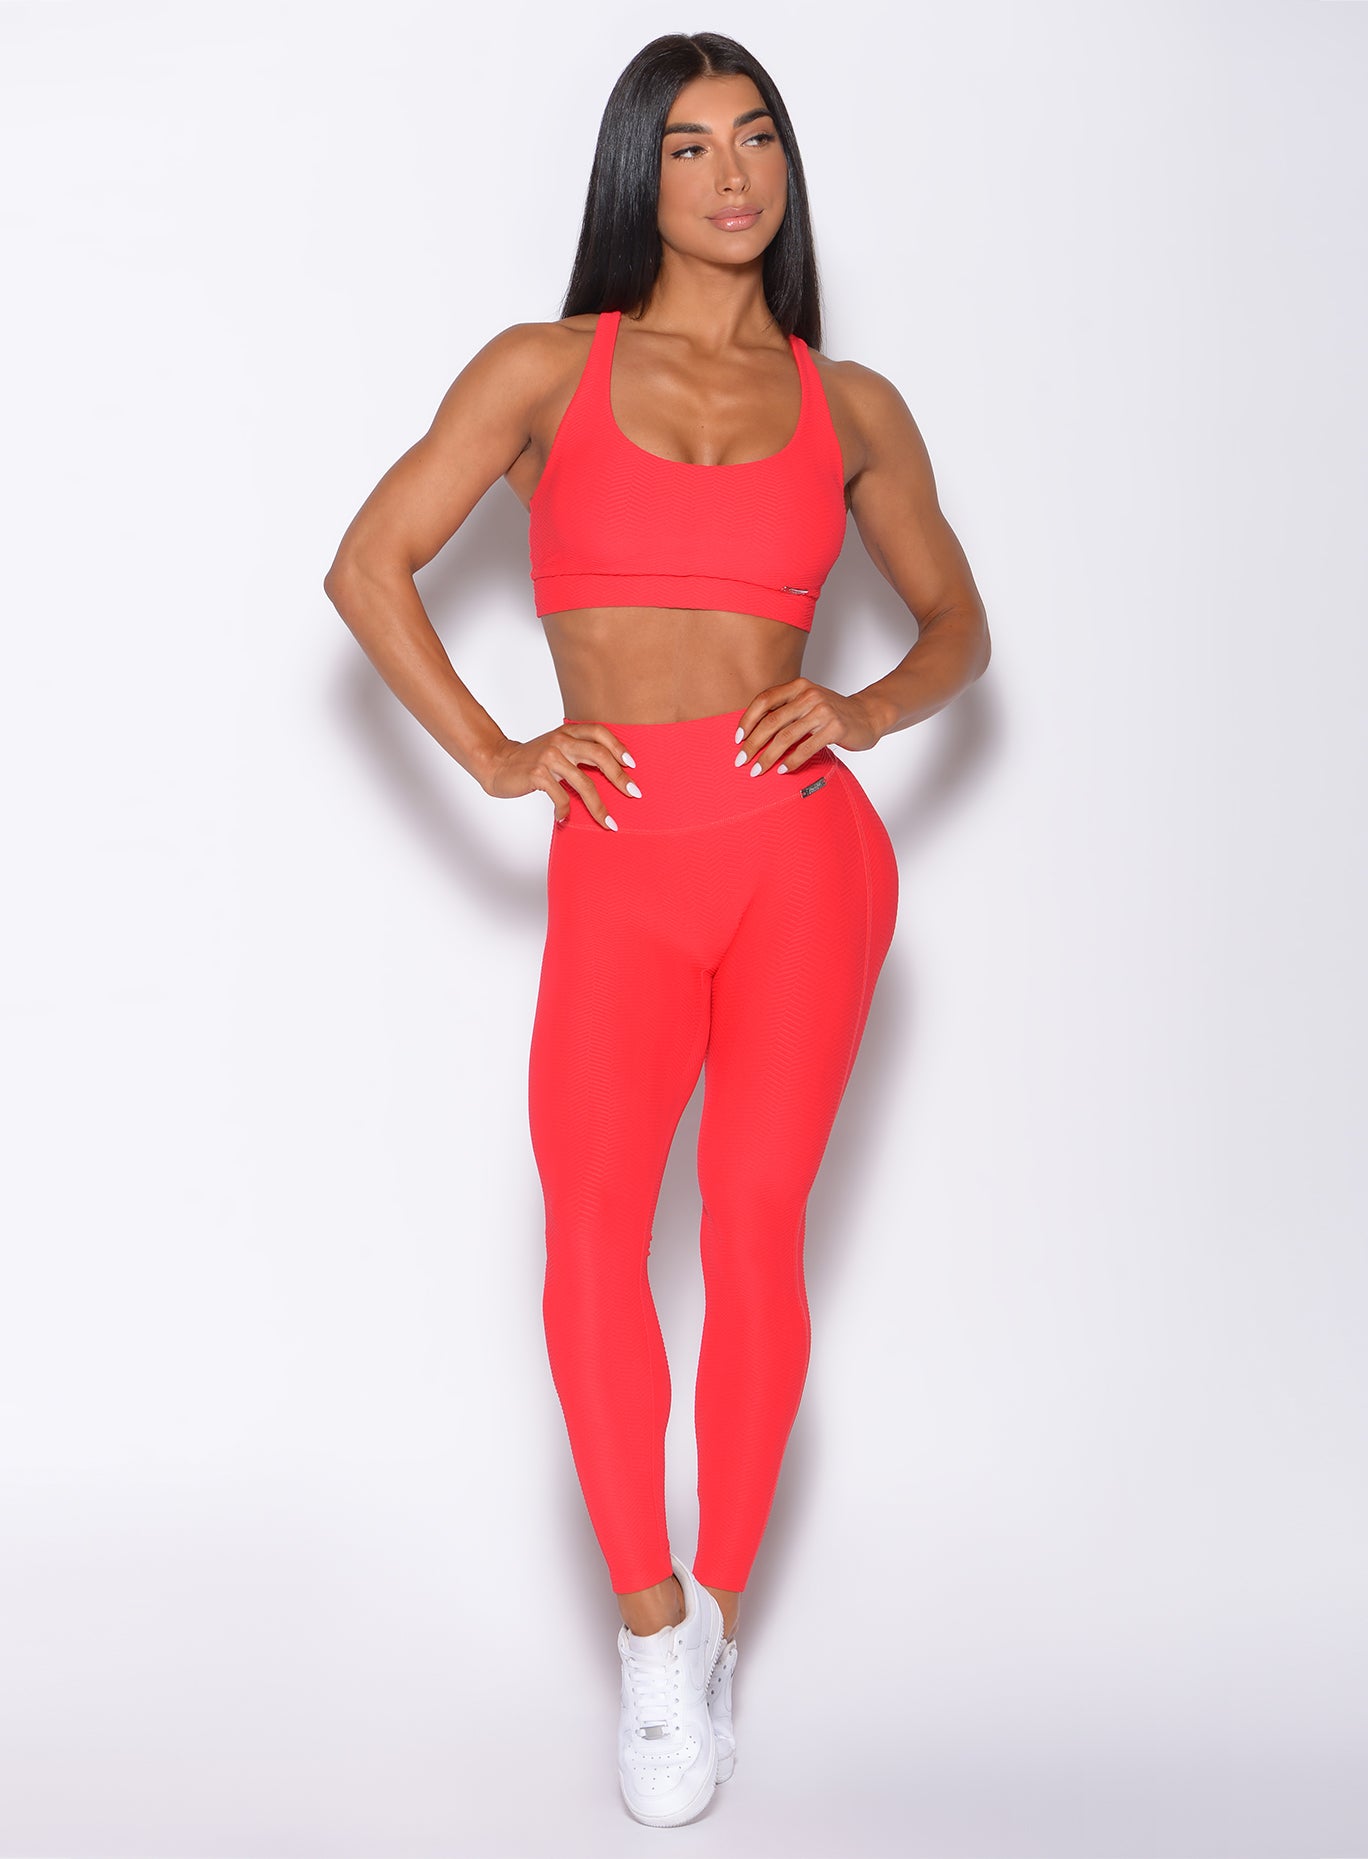 Back profile view of a model wearing our chevron sports bra in flame red color and a matching leggings